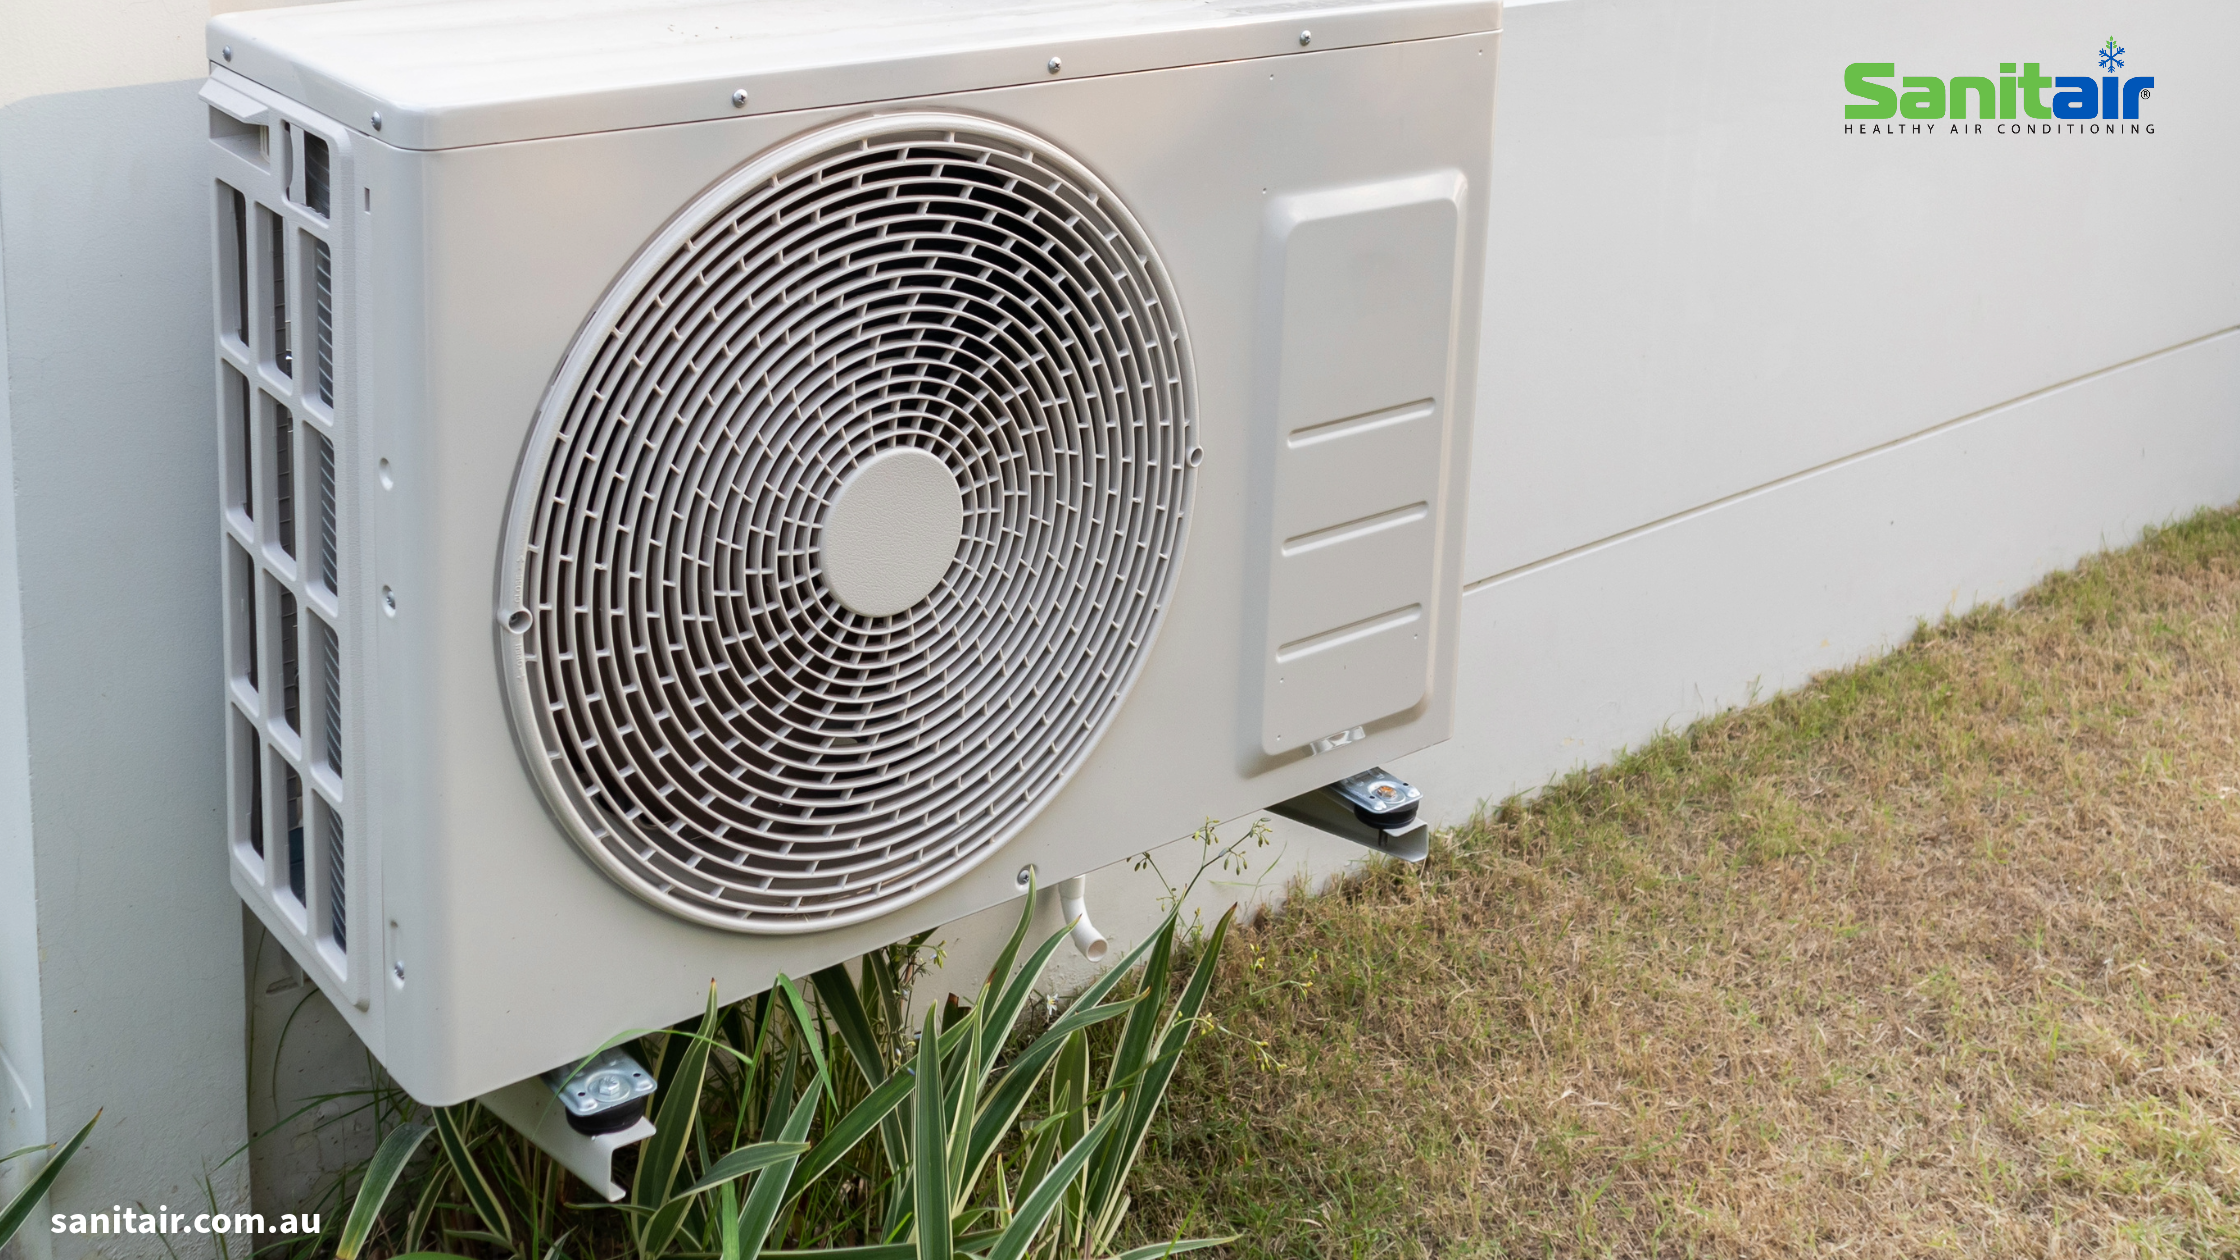 Outdoor Air Conditoining Systems, Do They Need Cleaning?